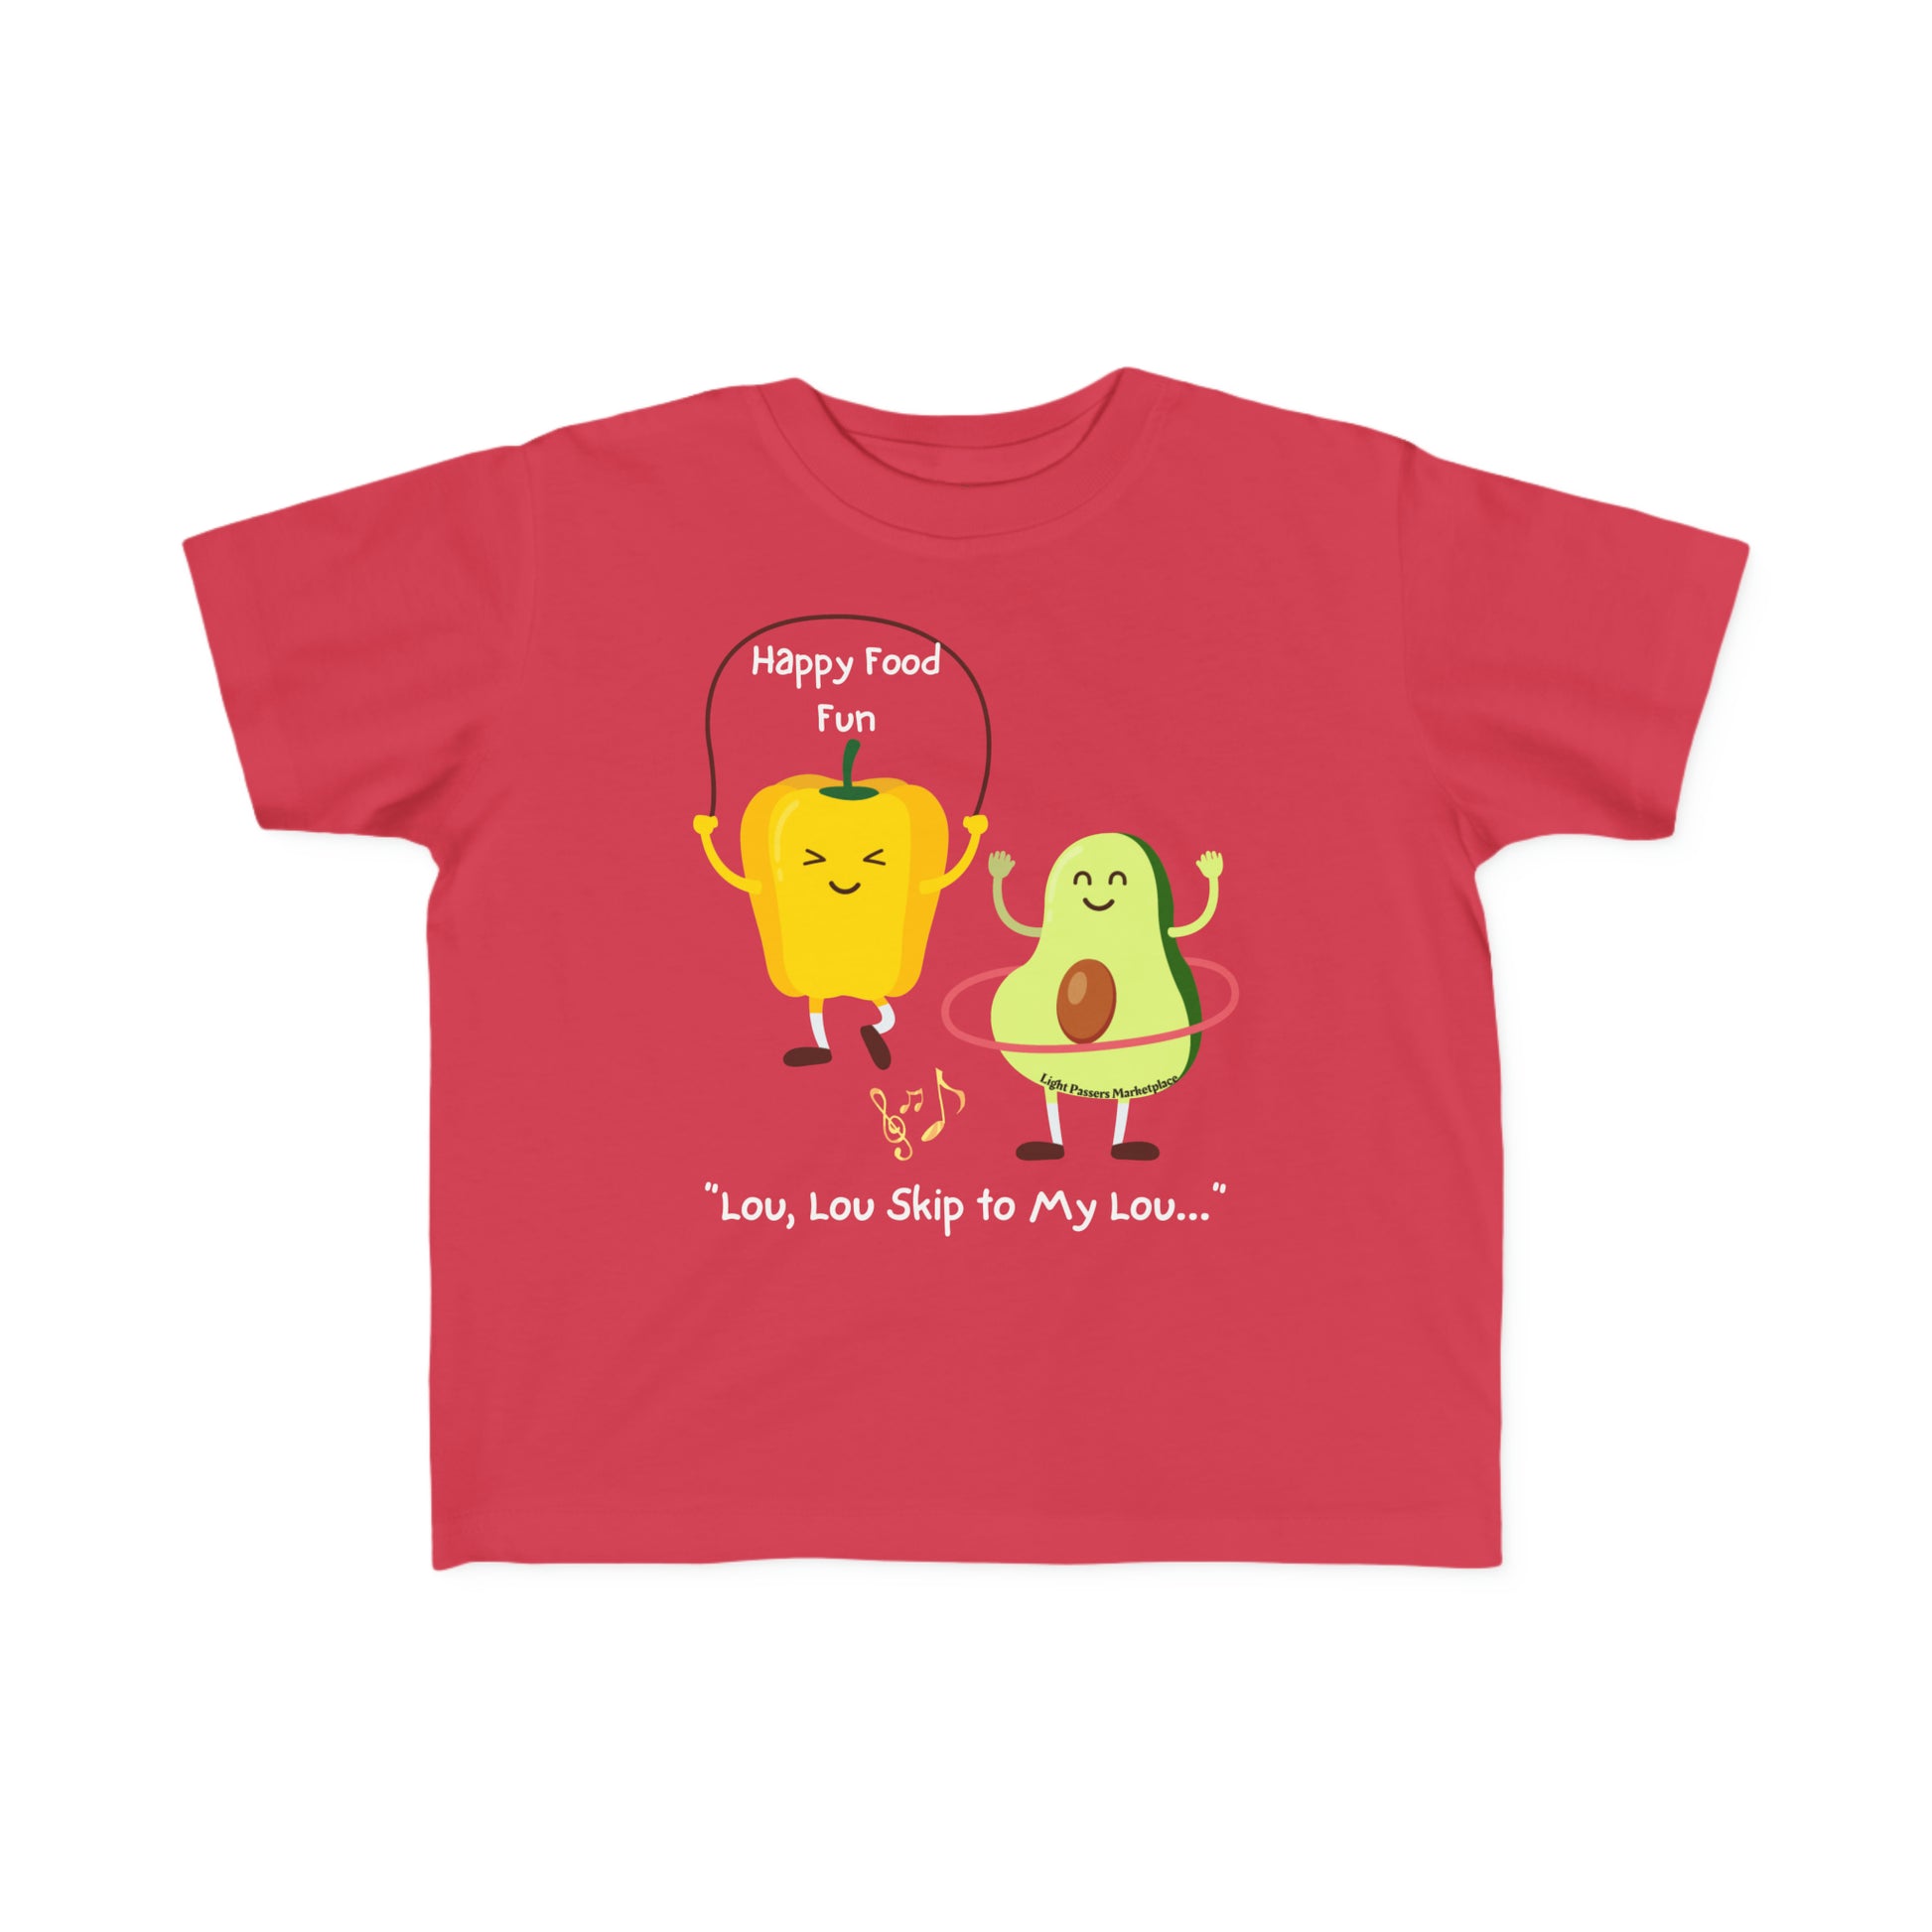 A red toddler t-shirt featuring cartoon characters, made of soft 100% combed cotton. Durable print, light fabric, tear-away label, and a classic fit for comfort.